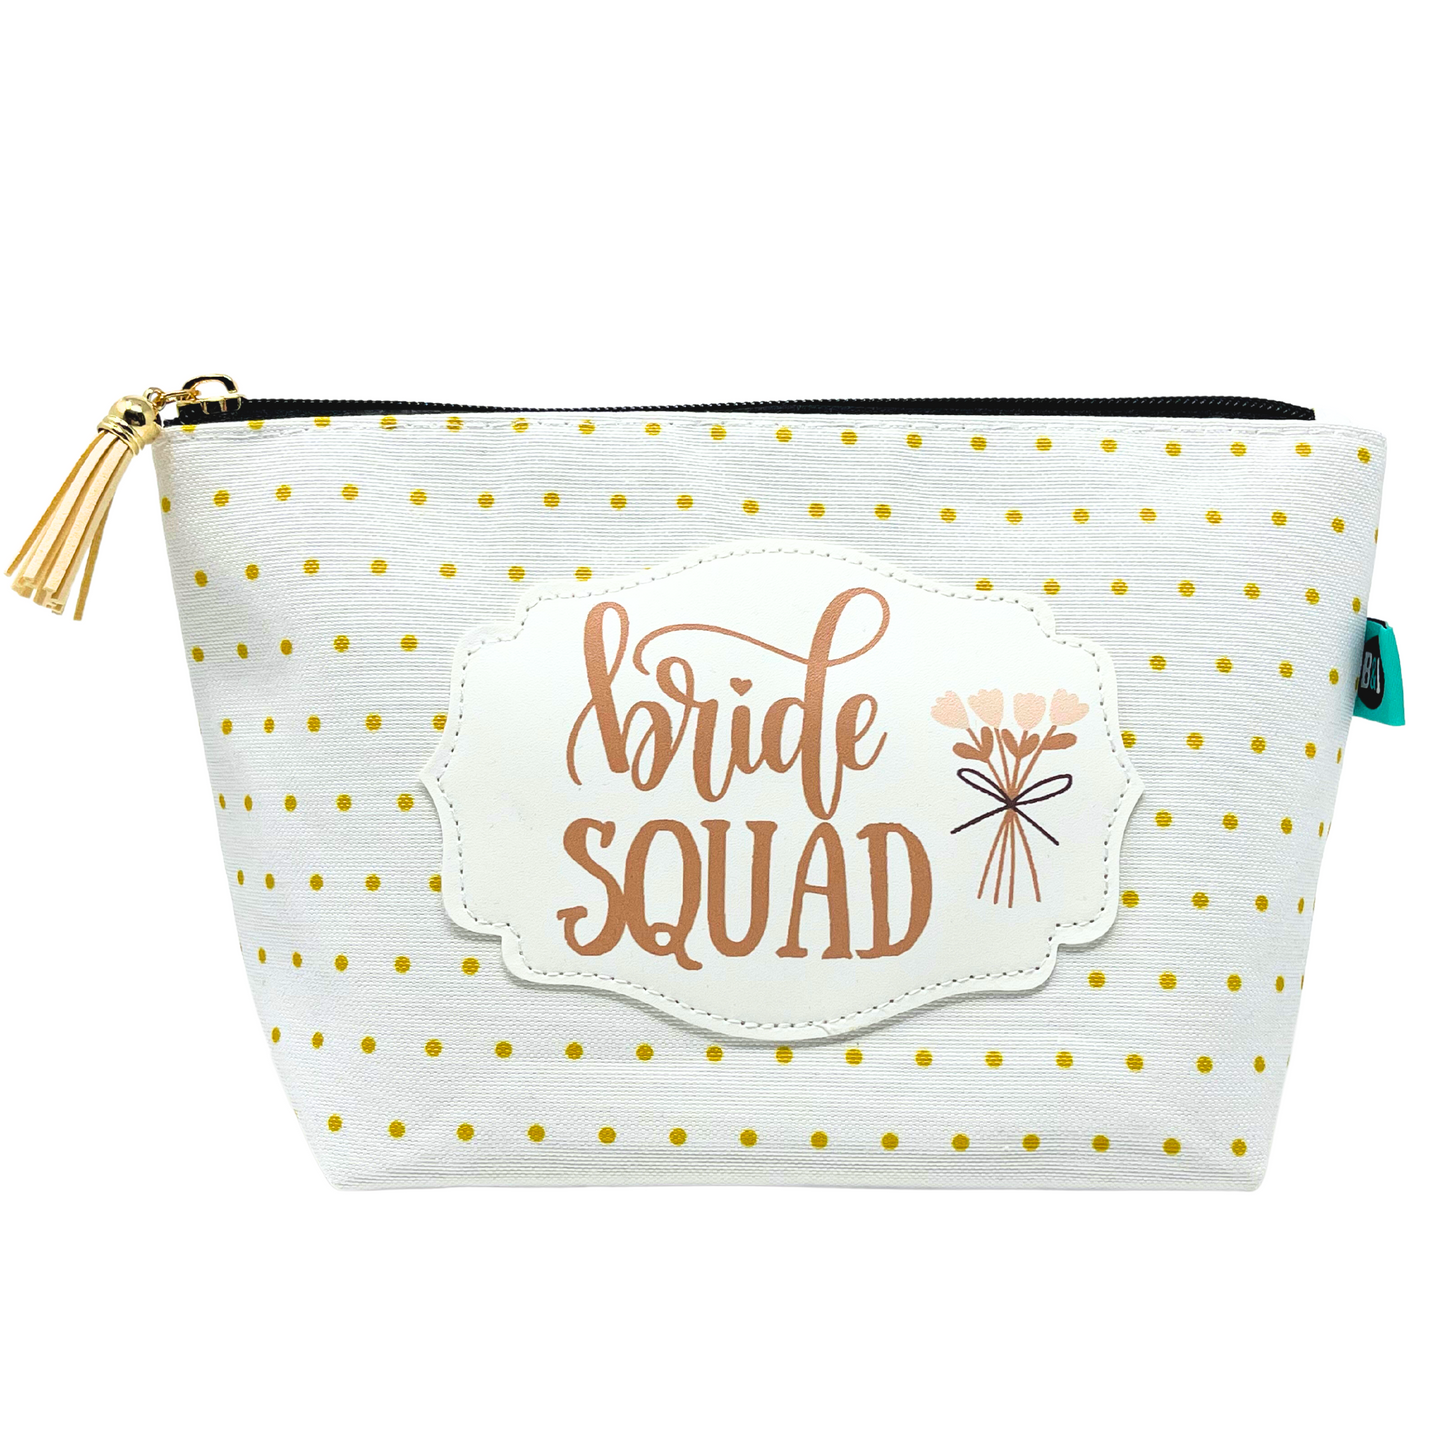 Bride Squad Gifts for Women Gold Dotted Janie Makeup Bags Cosmetic Bag Travel Toiletry Makeup Pouch Pencil Bag with Zipper Best Wedding Gifts